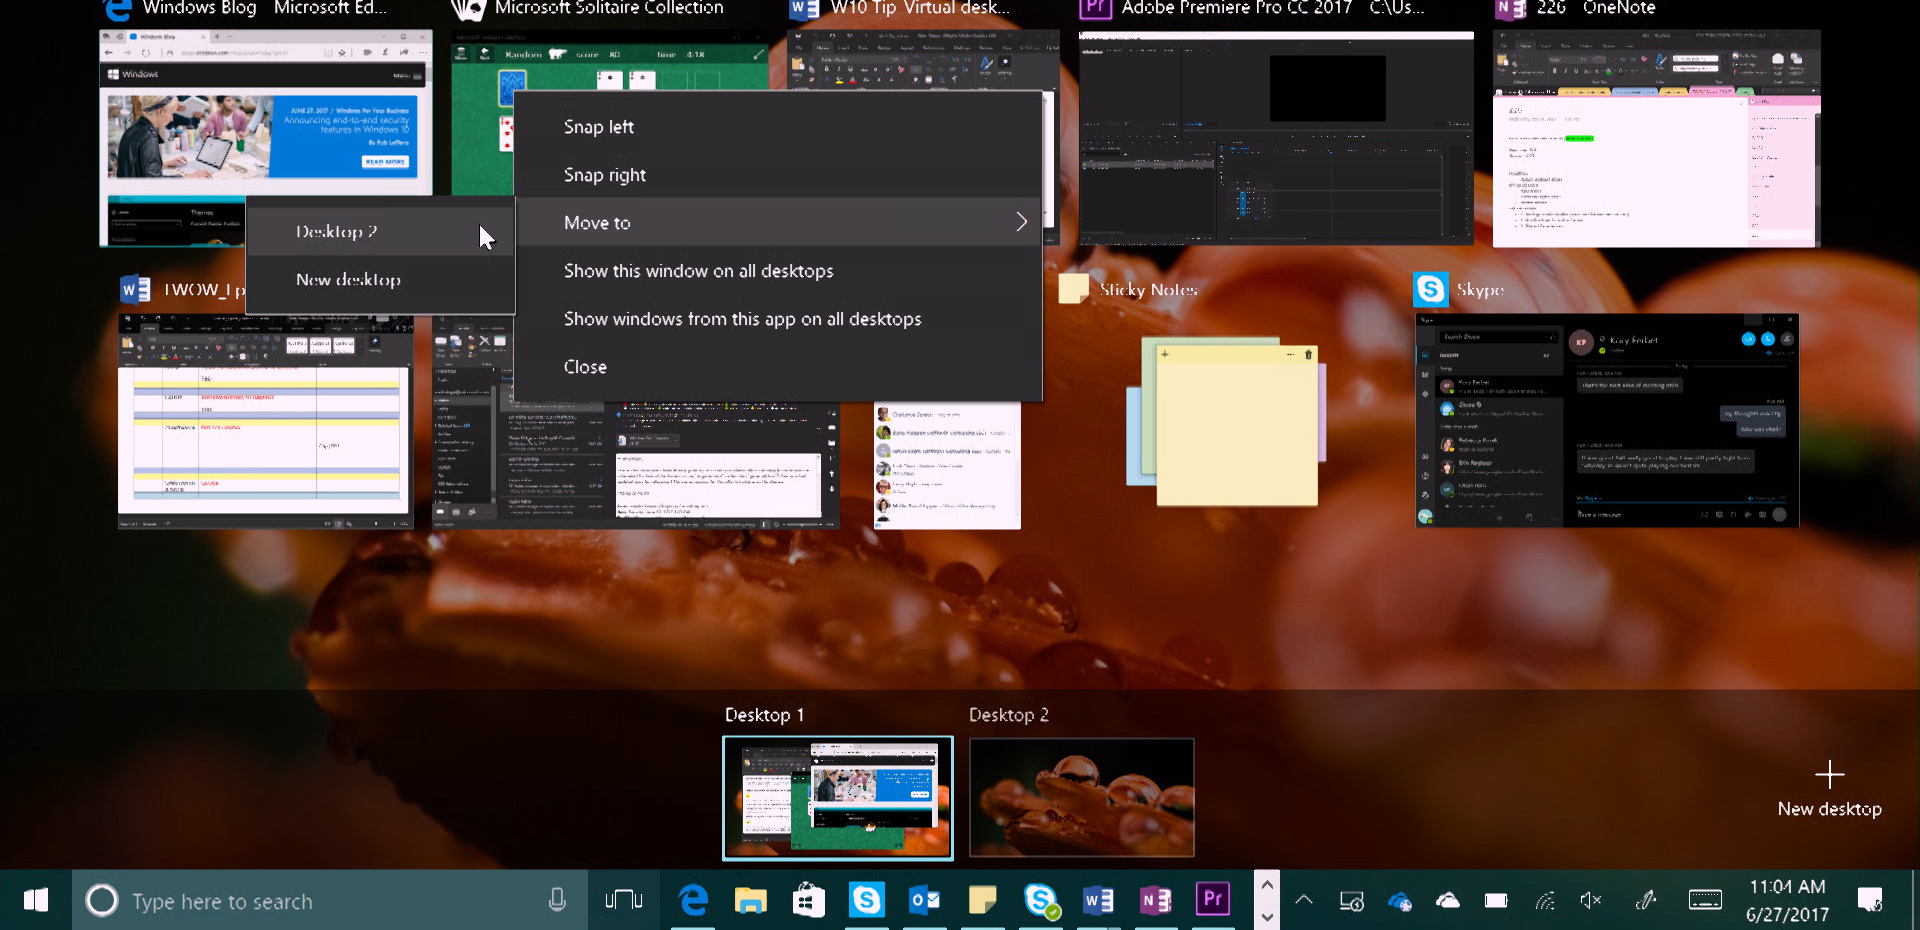 Keep your apps organized with virtual desktops